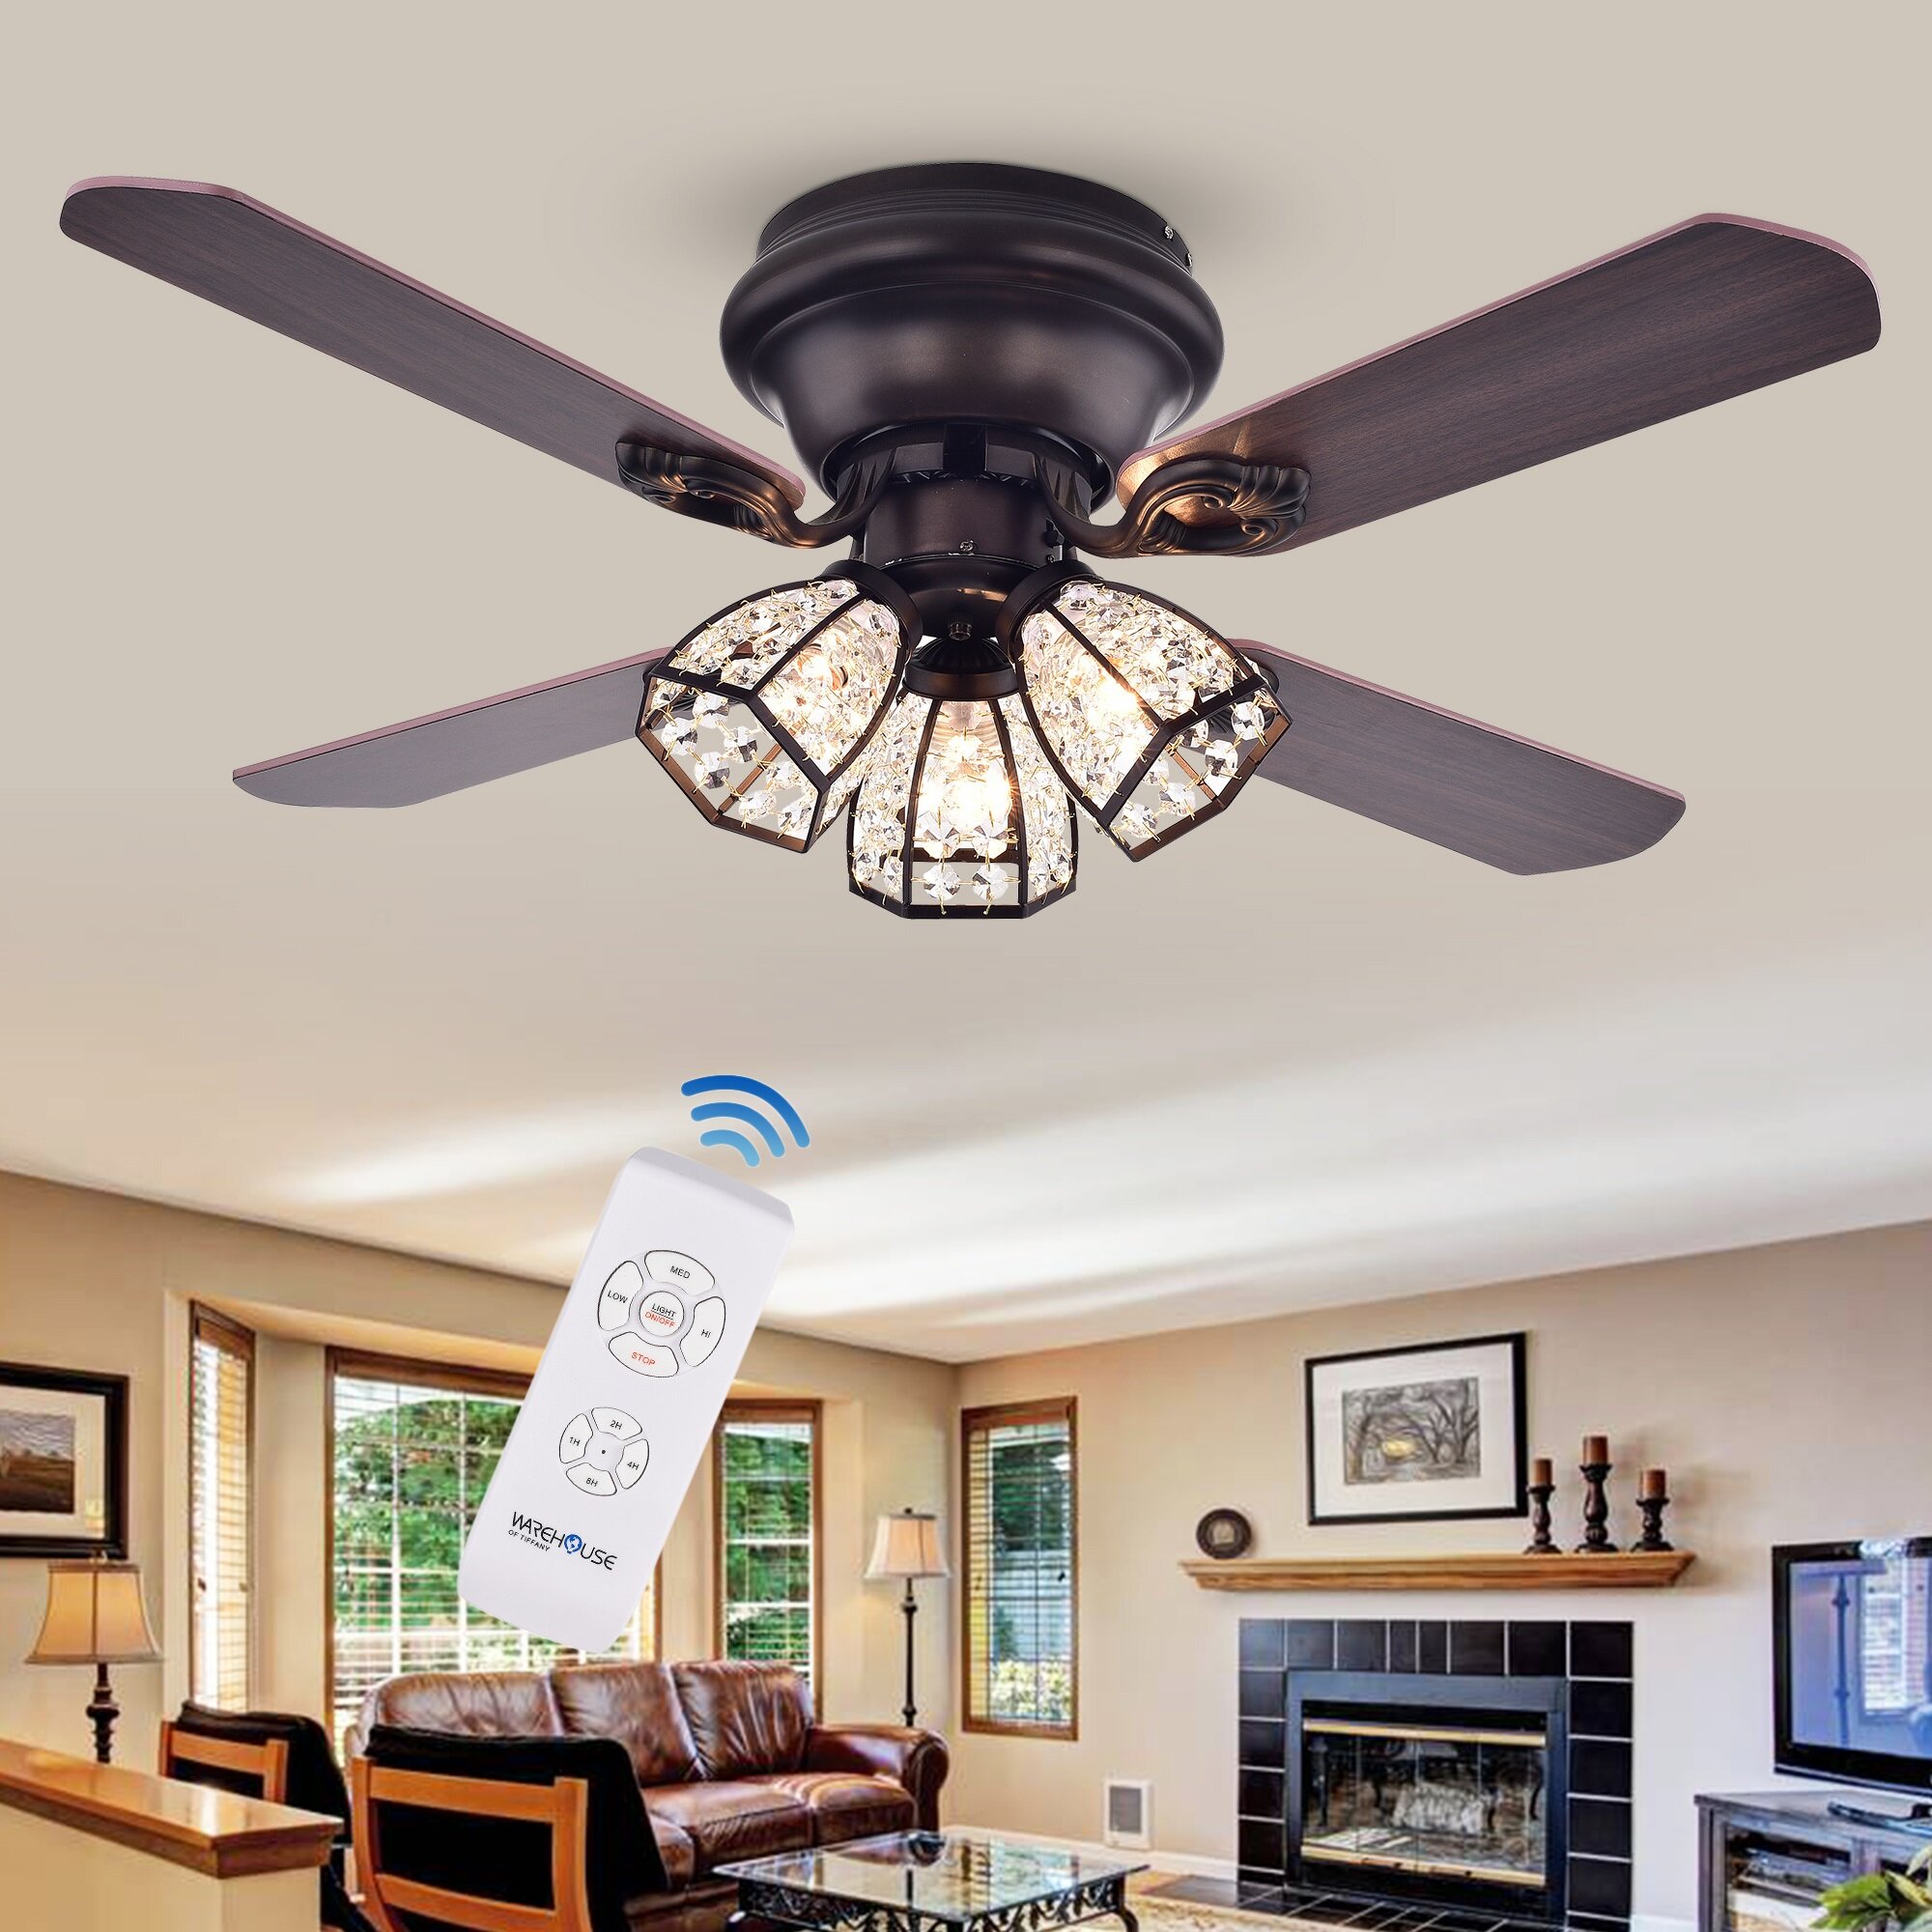 46+ Spectacular Photos Of Living Room Ceiling Fans With Lights Concept